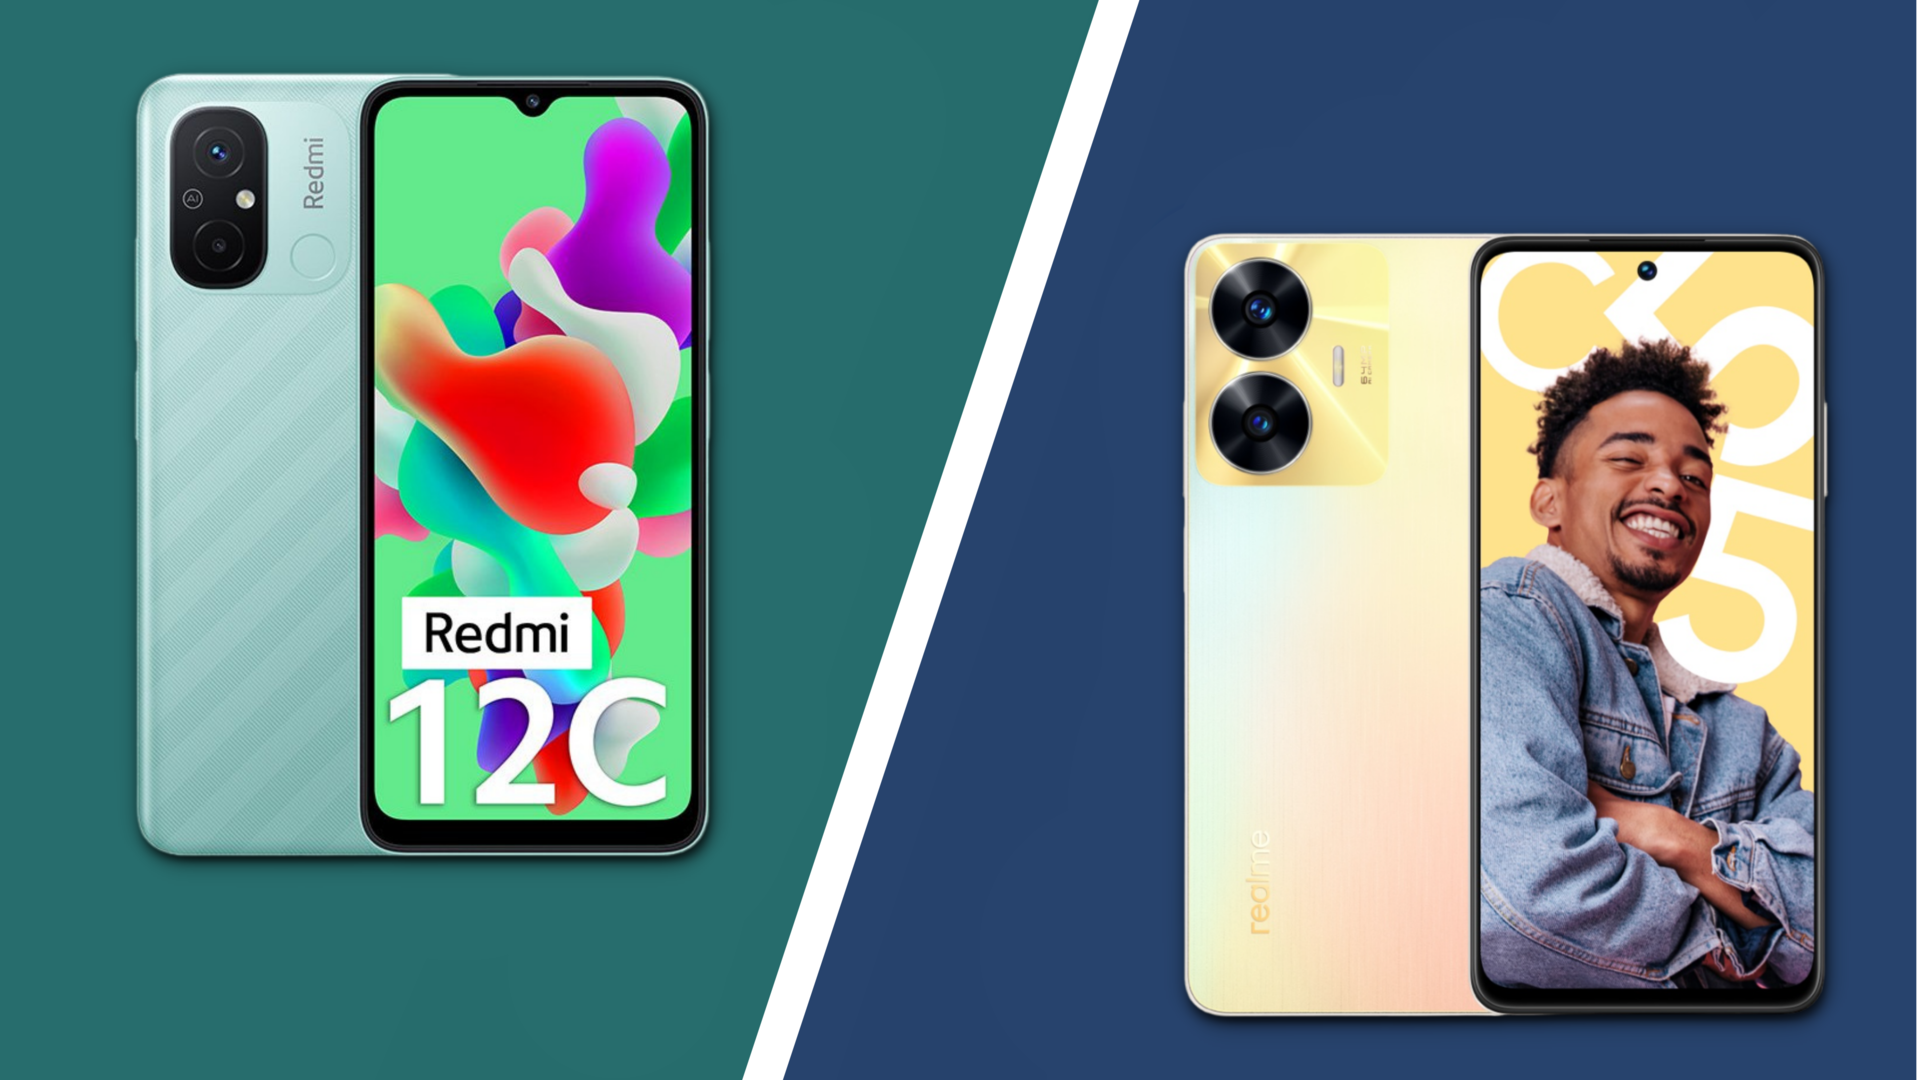 Redmi 12C v/s Realme C55: Which budget smartphone is better?